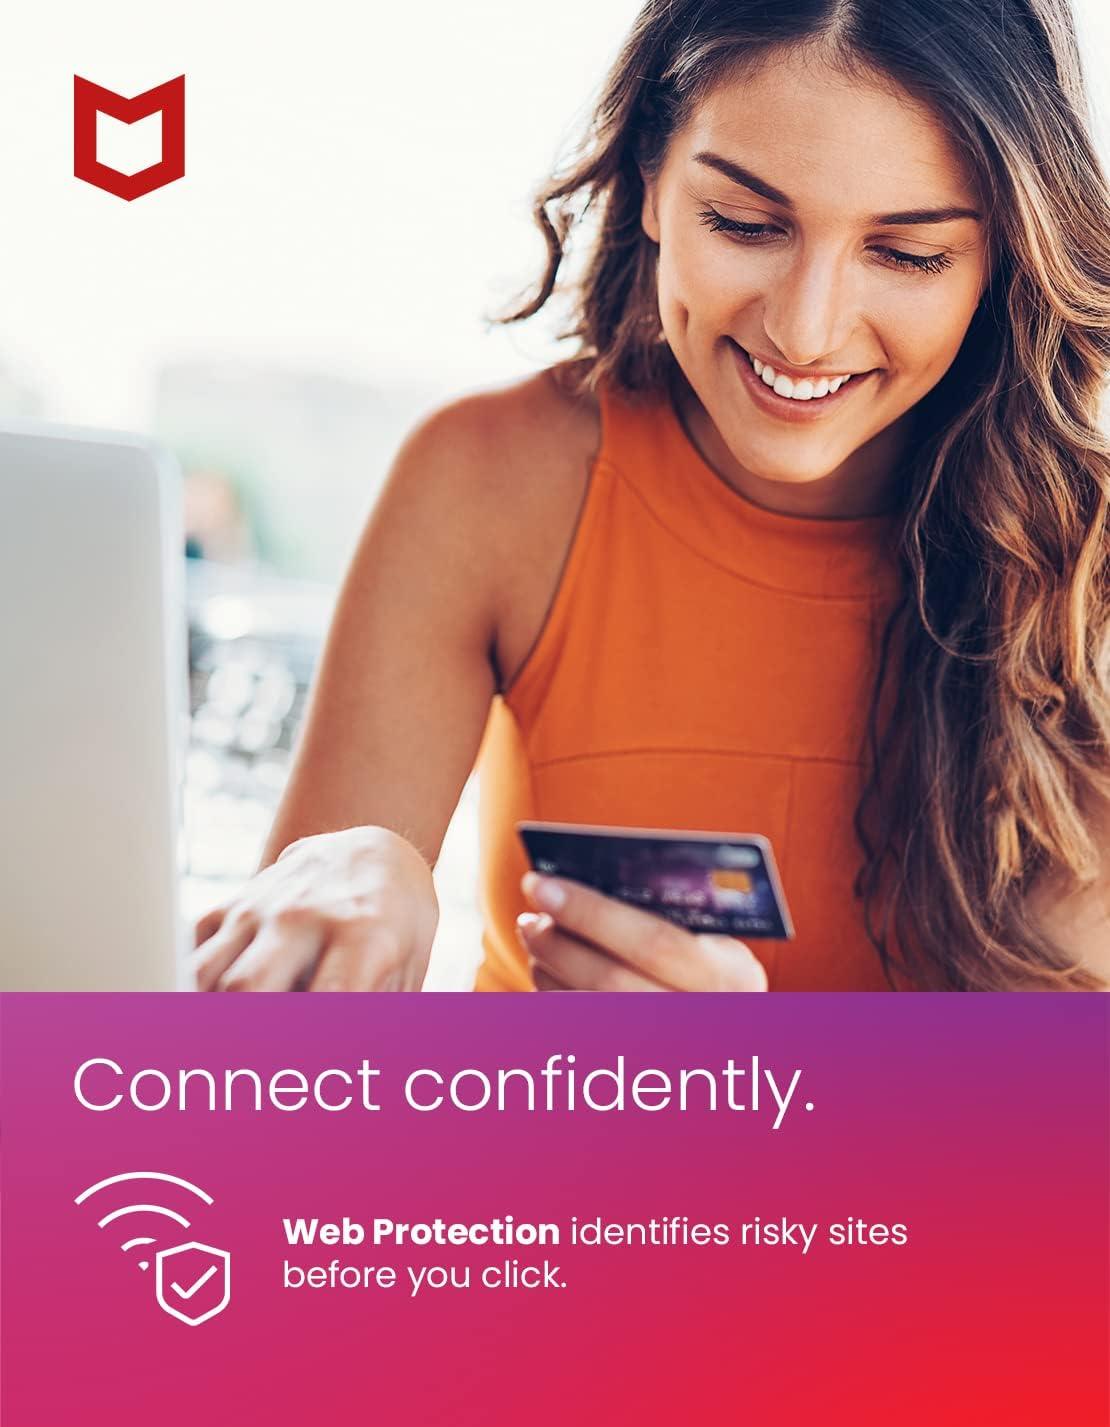 McAfee Internet Security - Instant Download for Windows and Mac (10 Computers)